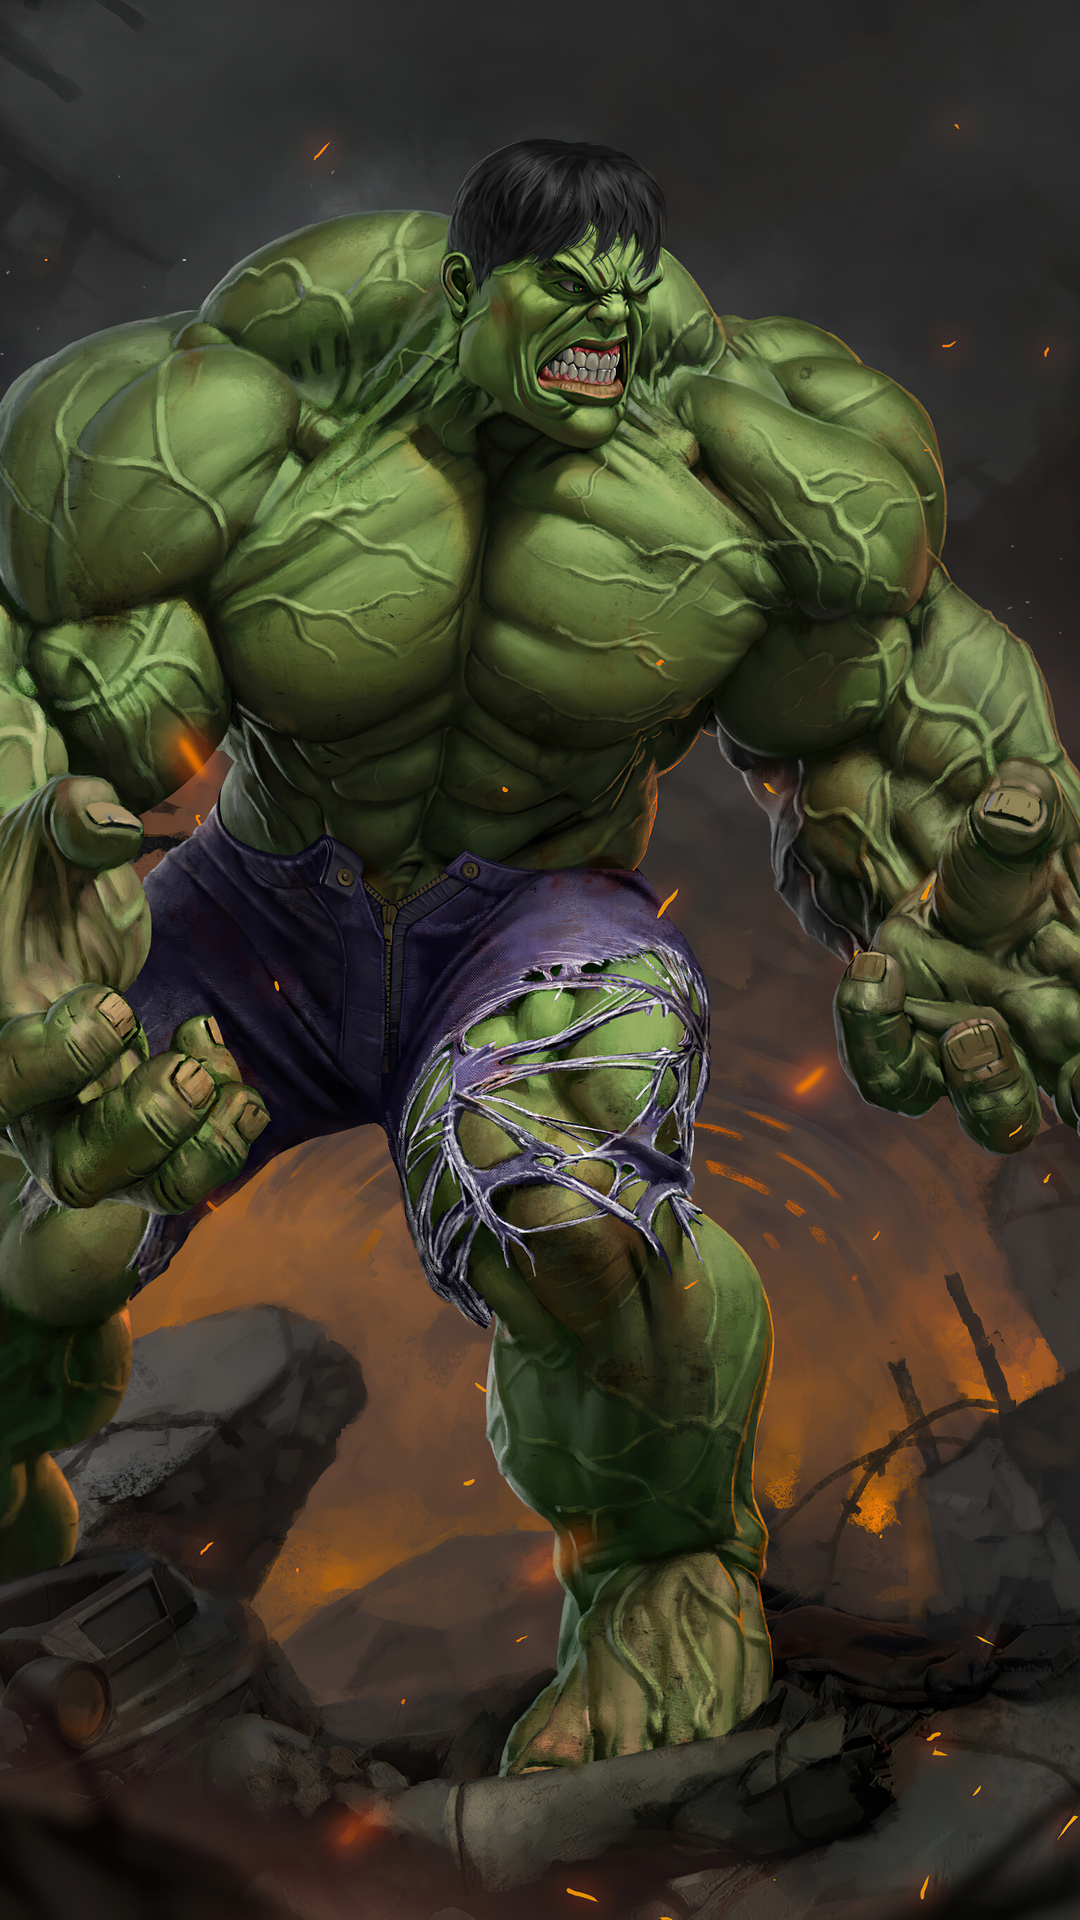 1080x1920 Big Hulk 4k Iphone 7,6s,6 Plus, Pixel xl ,One Plus 3,3t,5 HD 4k  Wallpapers, Images, Backgrounds, Photos and Pictures